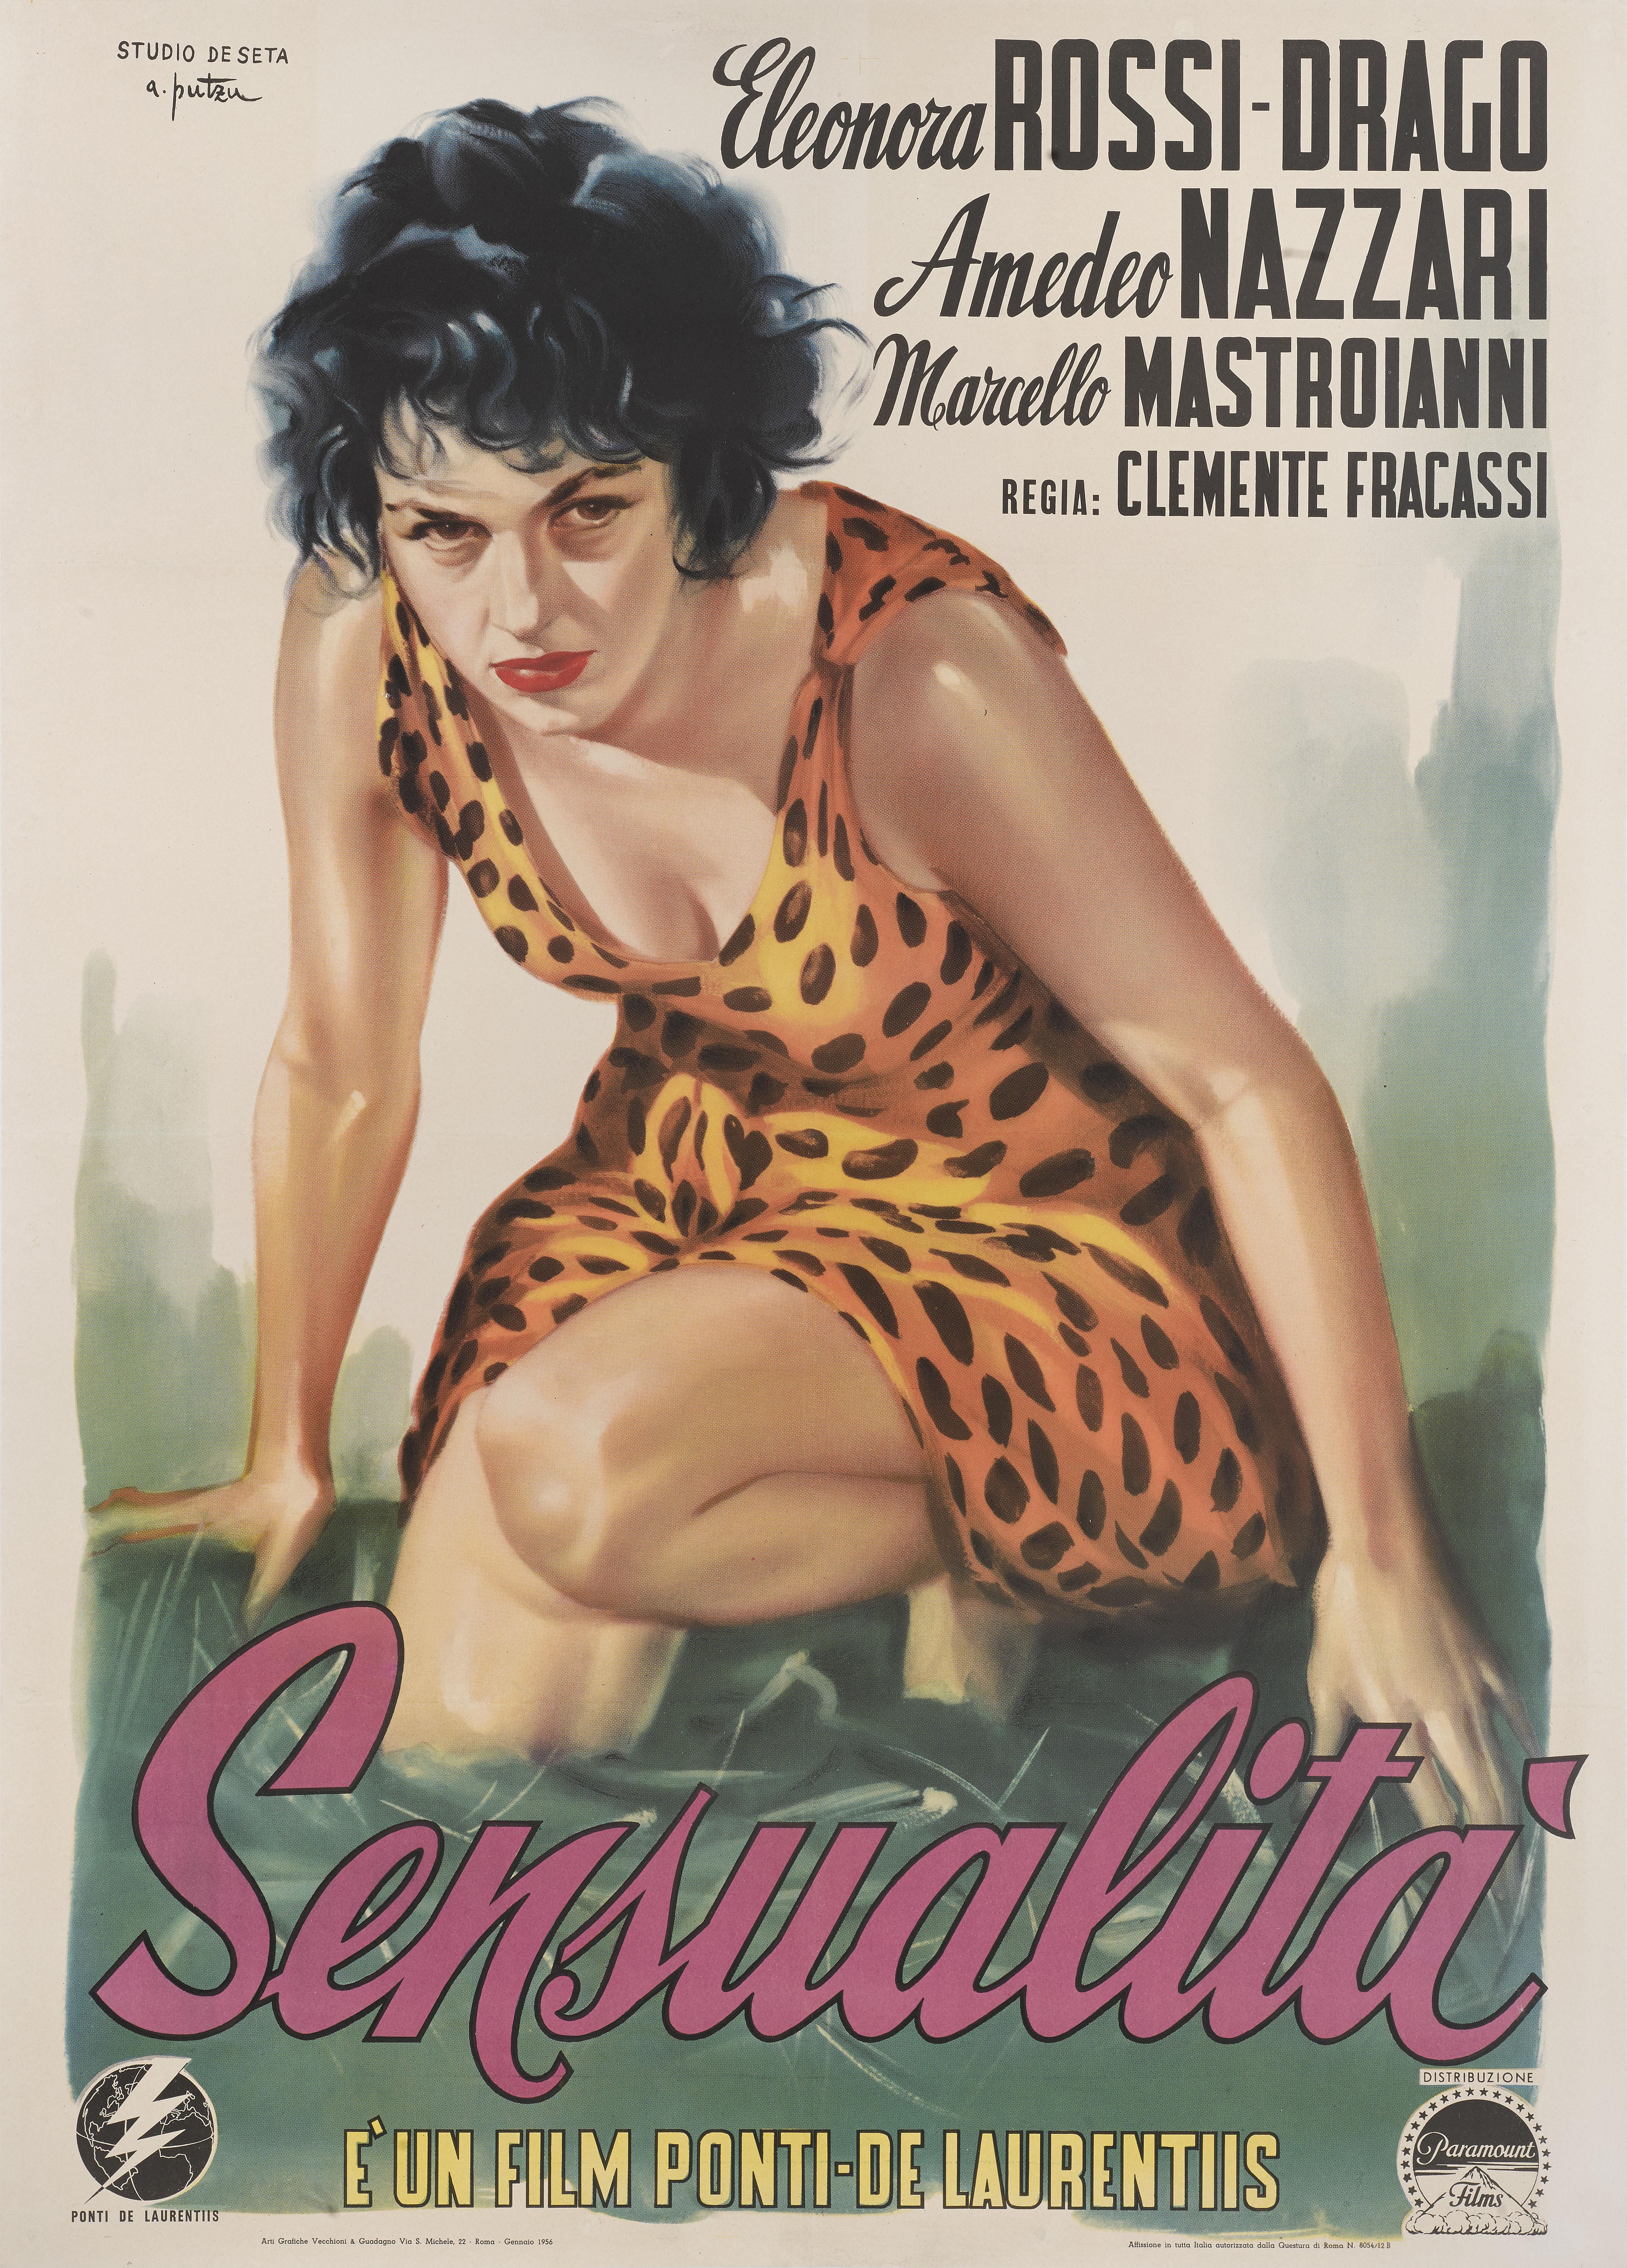 This is an extremely rare original Italian film poster for the 1952 film Sensualita 
This film starred Marcello Mastroianni. Eleonora Rossi Drago and Amedeo Nazzari. The film was directed by Clemente Fracassi.
The art work on this poster is by